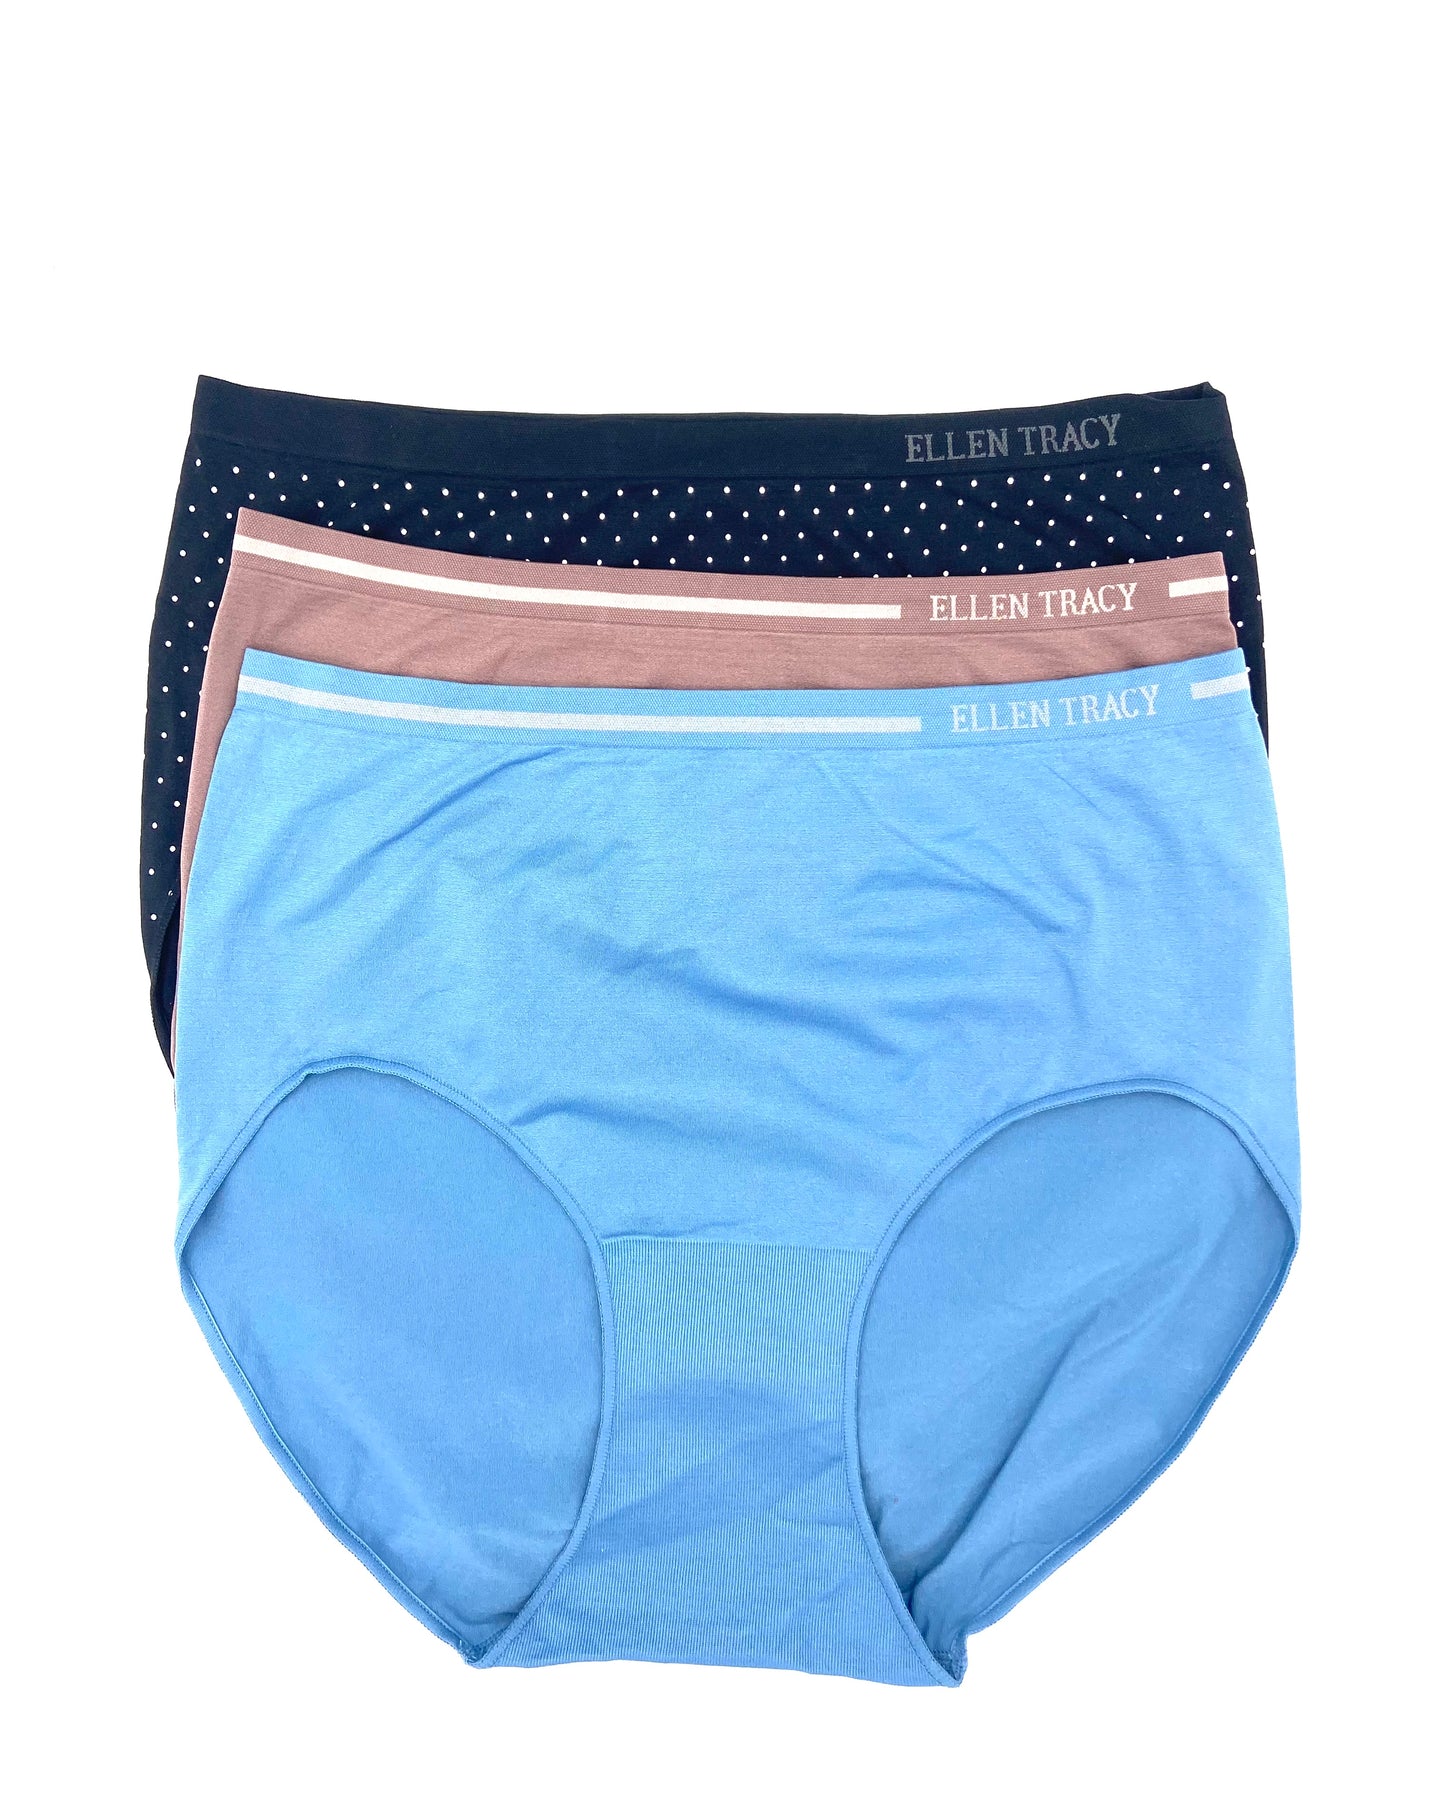 Carole Hochman Underwear Brief Mystery Pack of 3 - Extra Large